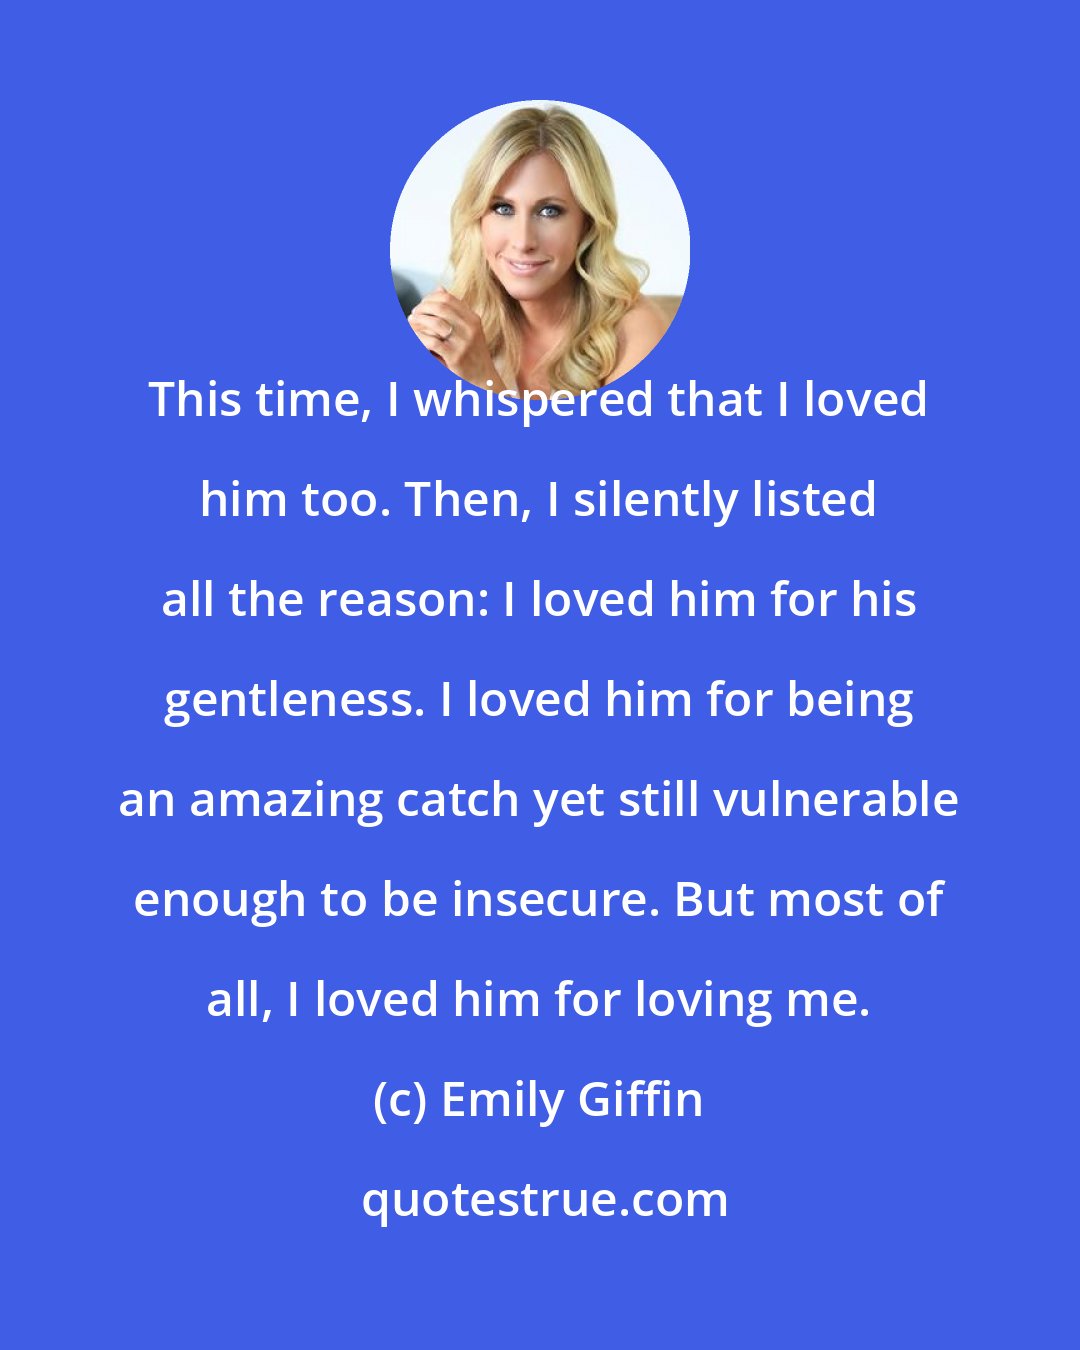 Emily Giffin: This time, I whispered that I loved him too. Then, I silently listed all the reason: I loved him for his gentleness. I loved him for being an amazing catch yet still vulnerable enough to be insecure. But most of all, I loved him for loving me.